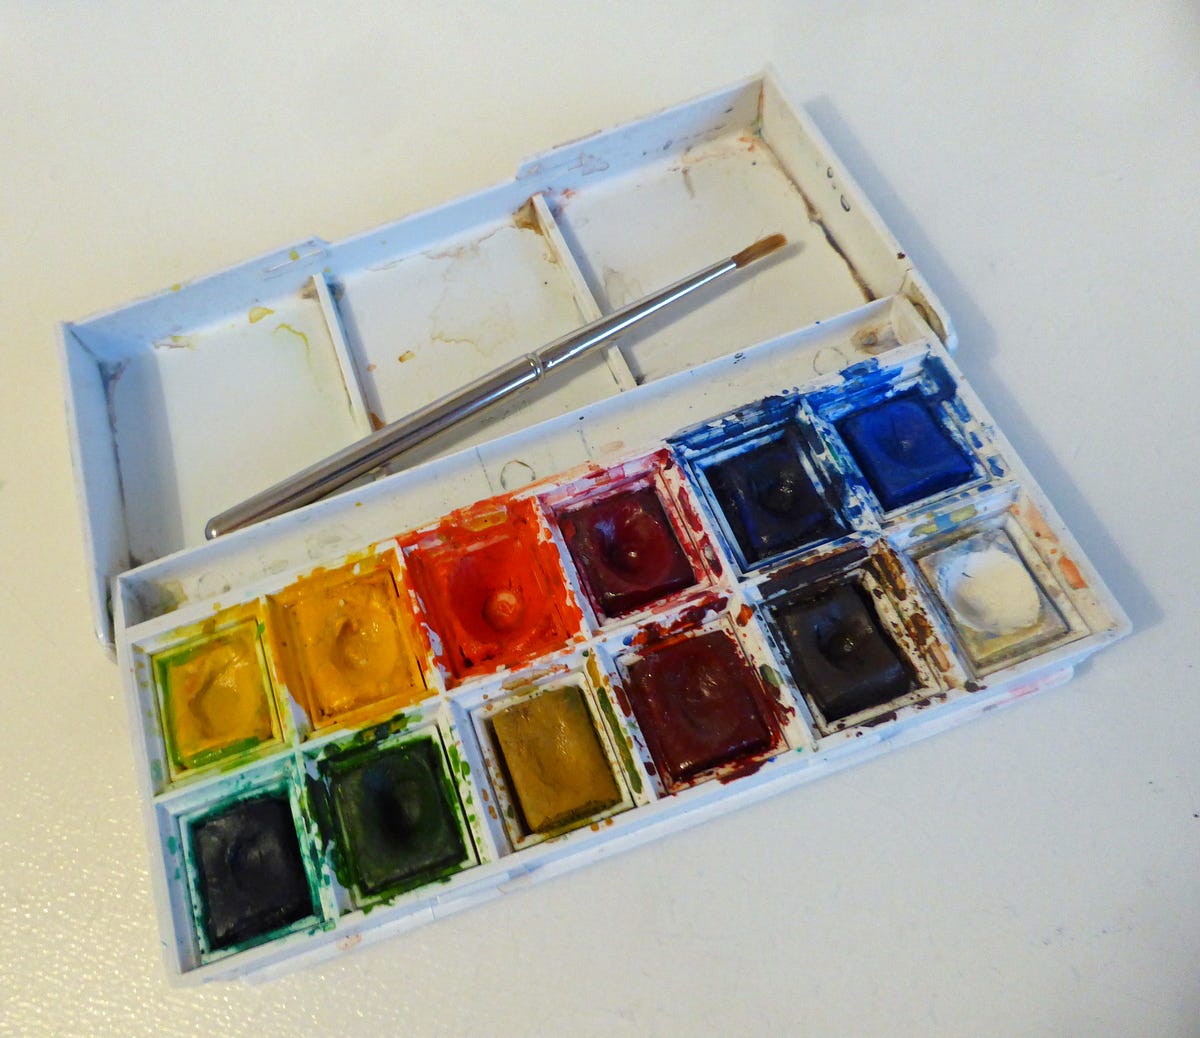 46: The Paint Box. When I was younger I wanted to make my…, by Eleanor  Scorah, Objects